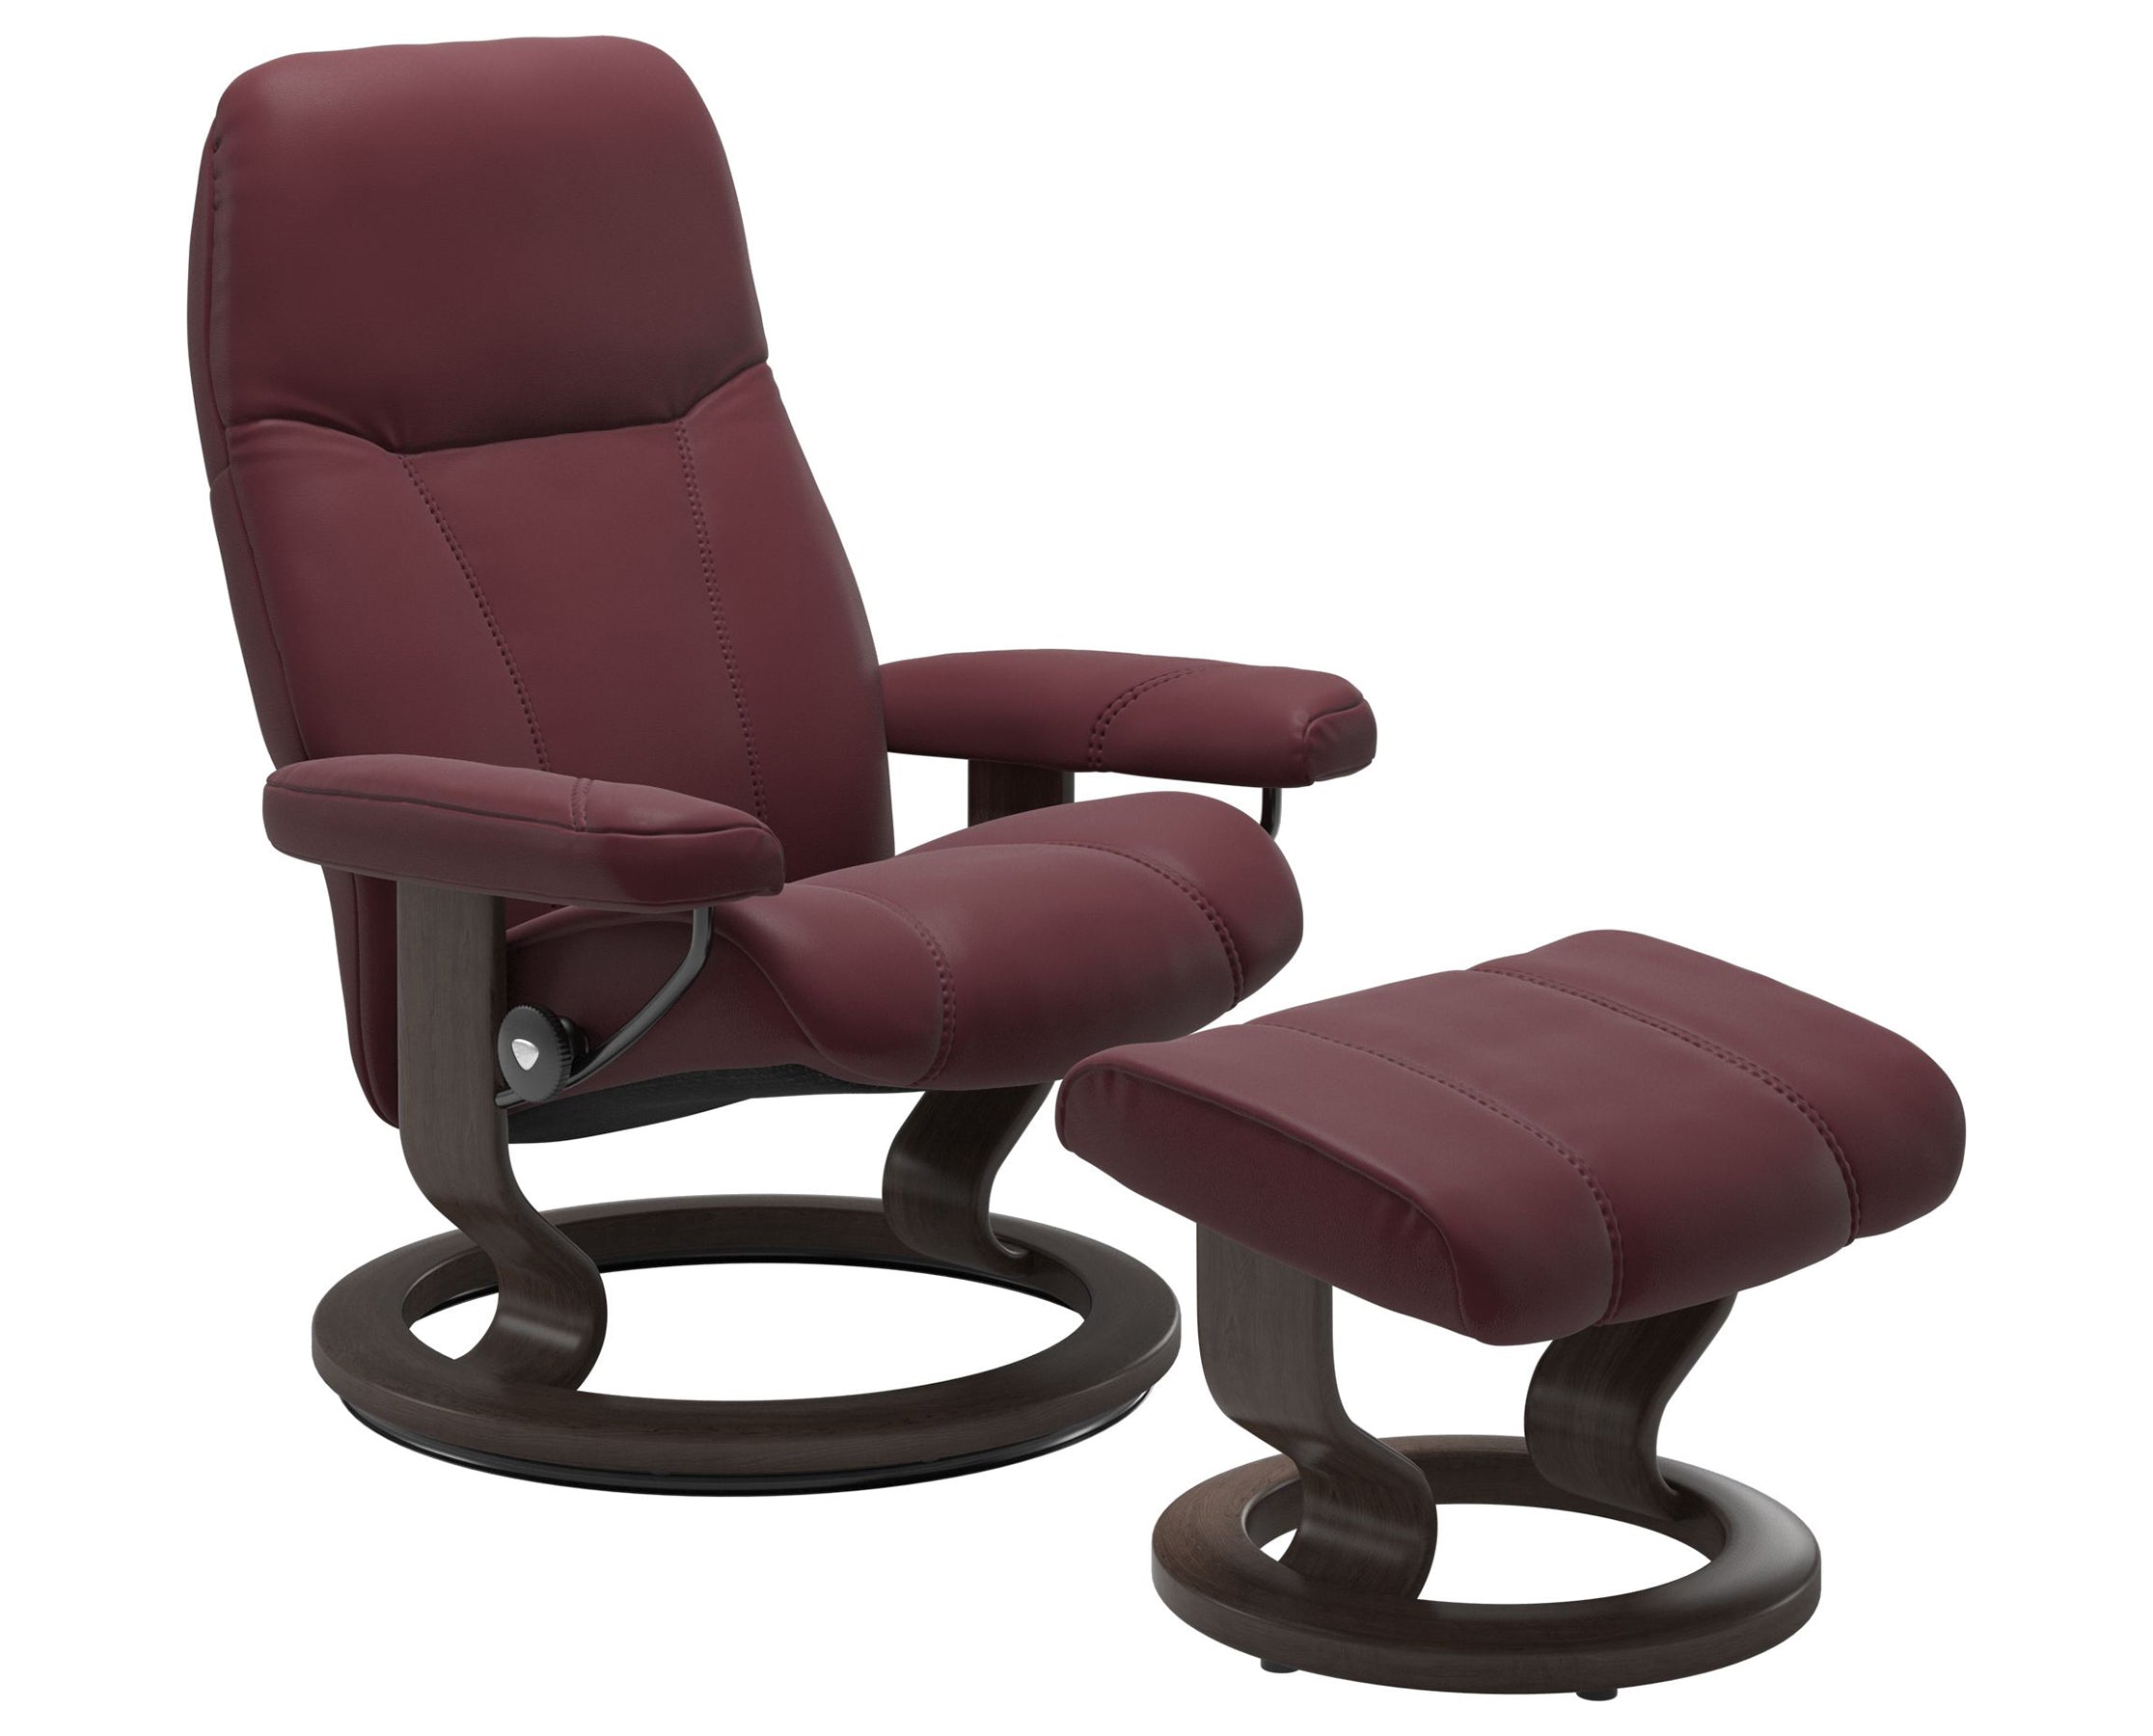 Batick Leather Bordeaux L and Wenge Base | Stressless Consul Classic Recliner - Promo | Valley Ridge Furniture